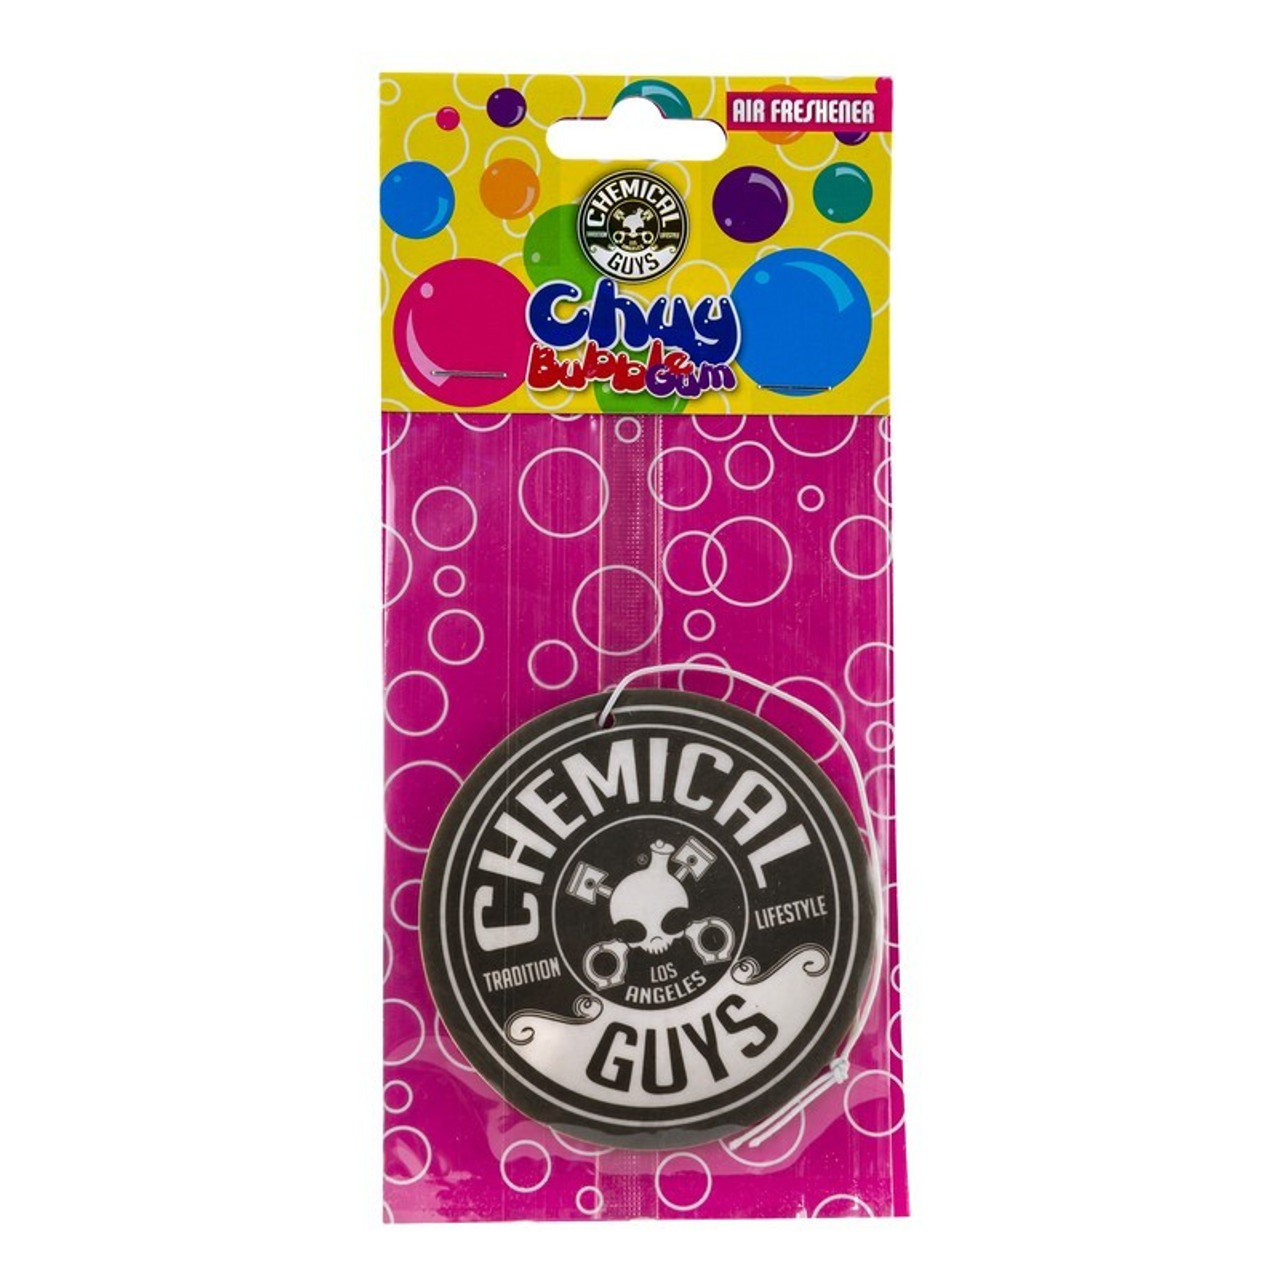 Chemical Guys Chuy Bubble Gum Hanging Air Freshener